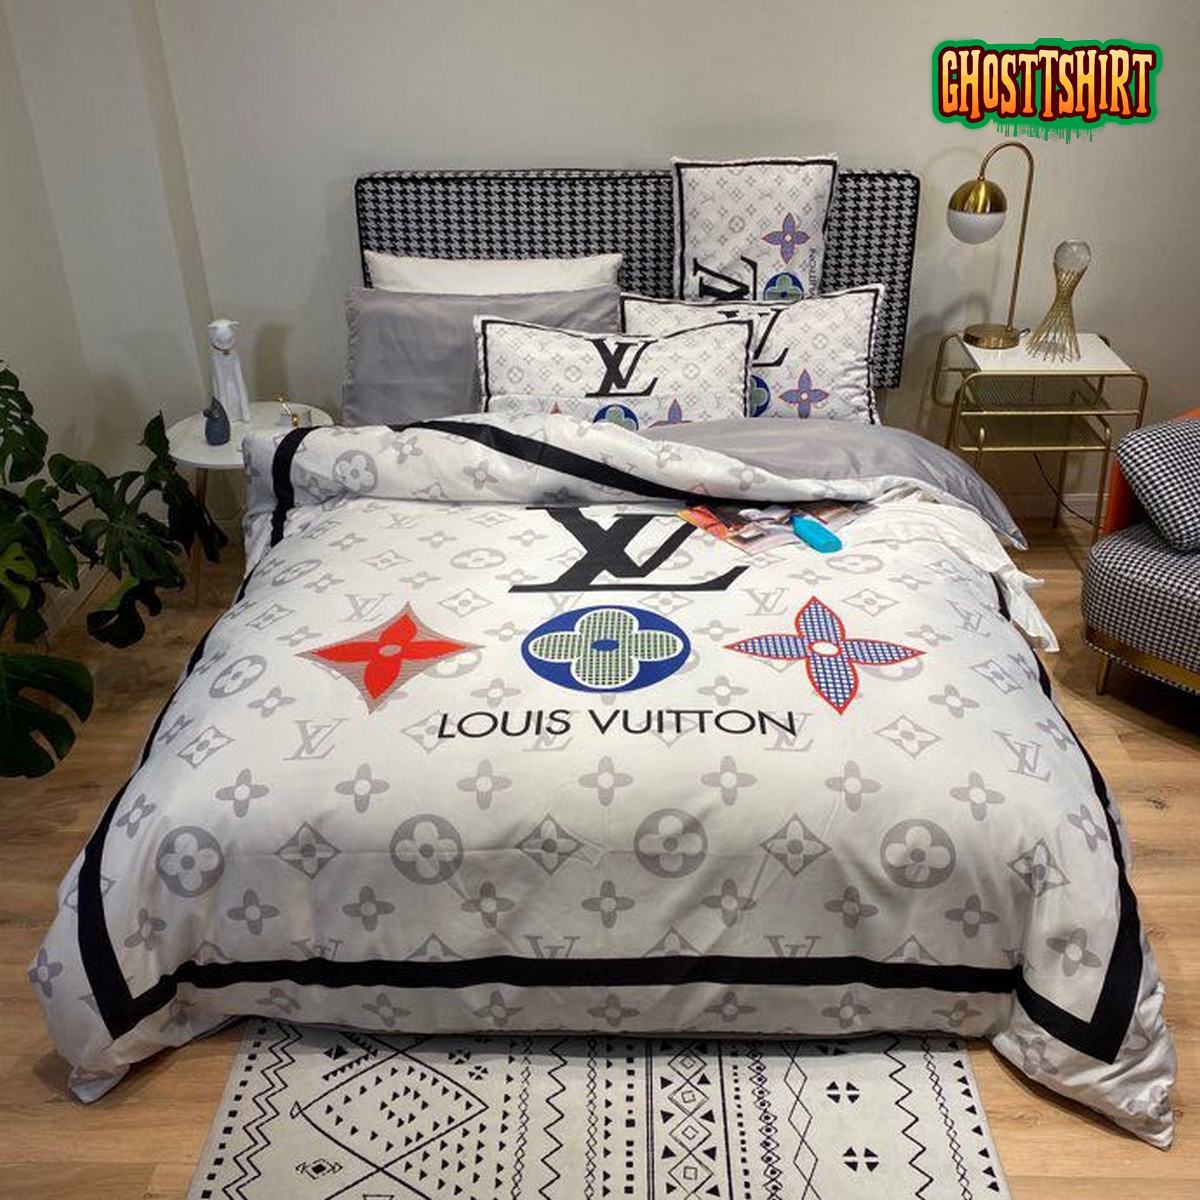 Best selling products Louis Vuitton And Supreme Son Goku All Over Print  Duvet Cover Bedroom Sets